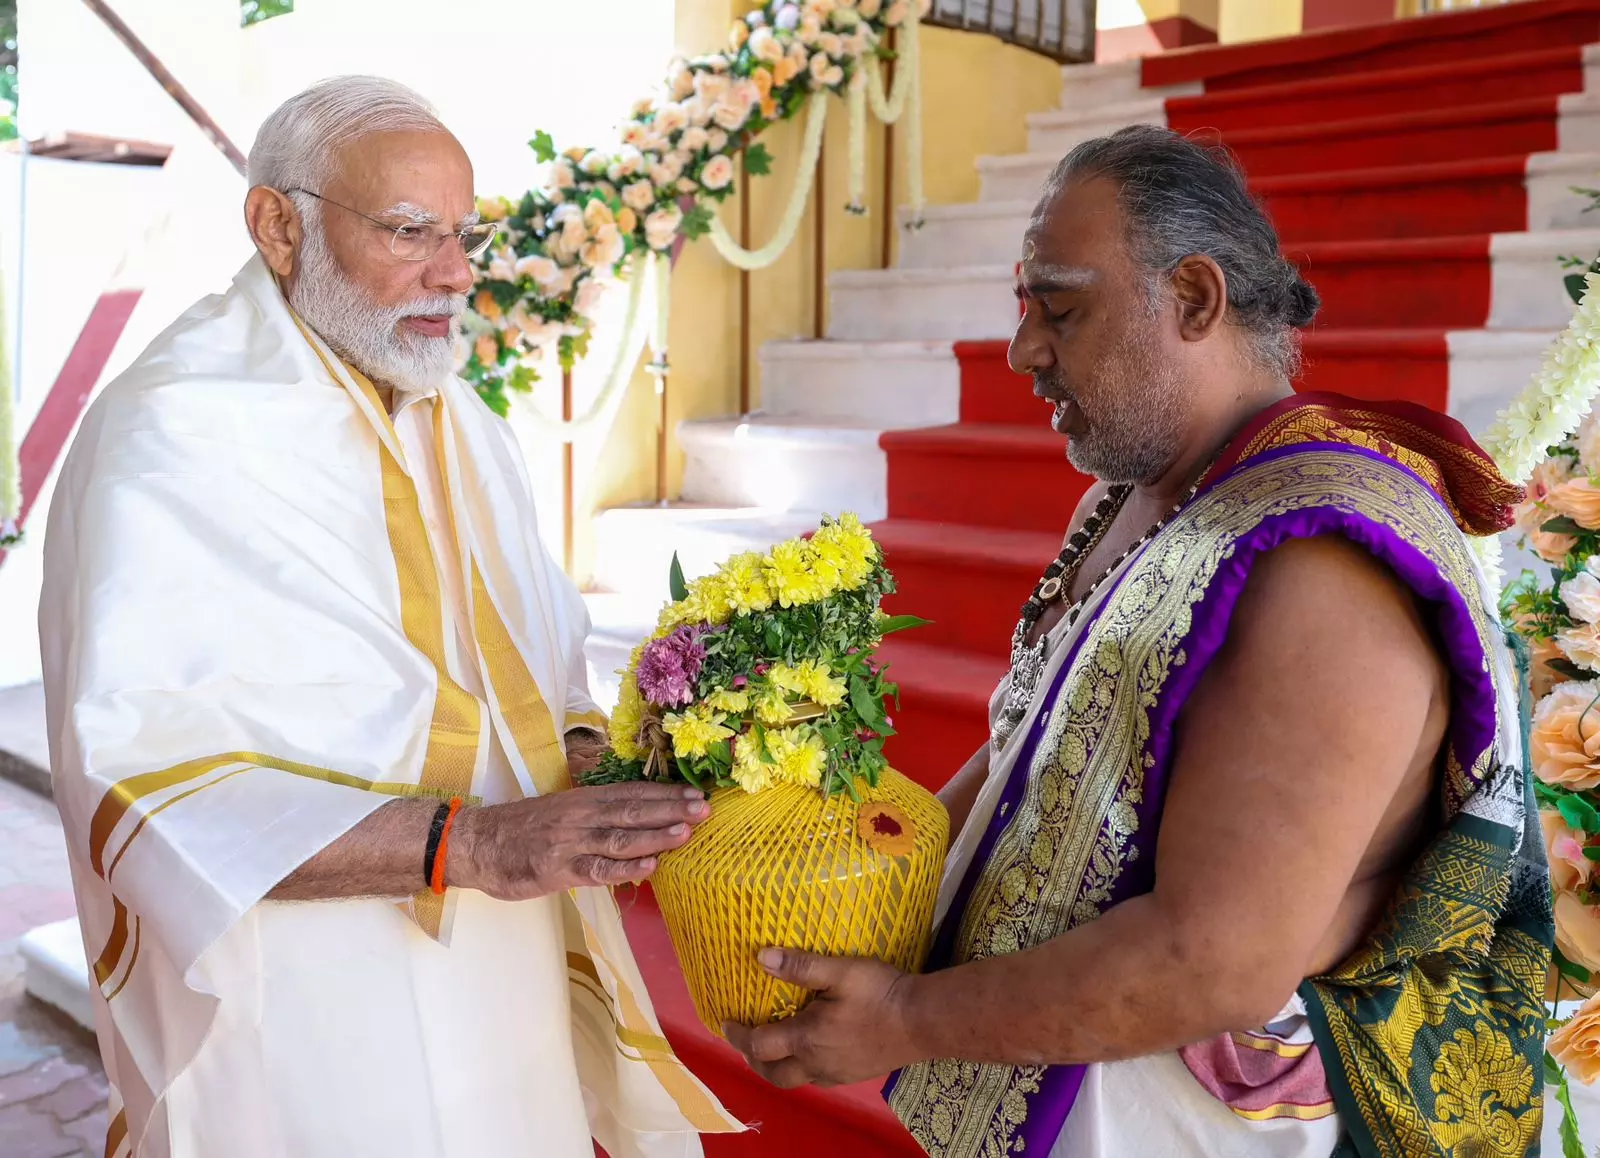 Modi wraps Ram-related places in south India